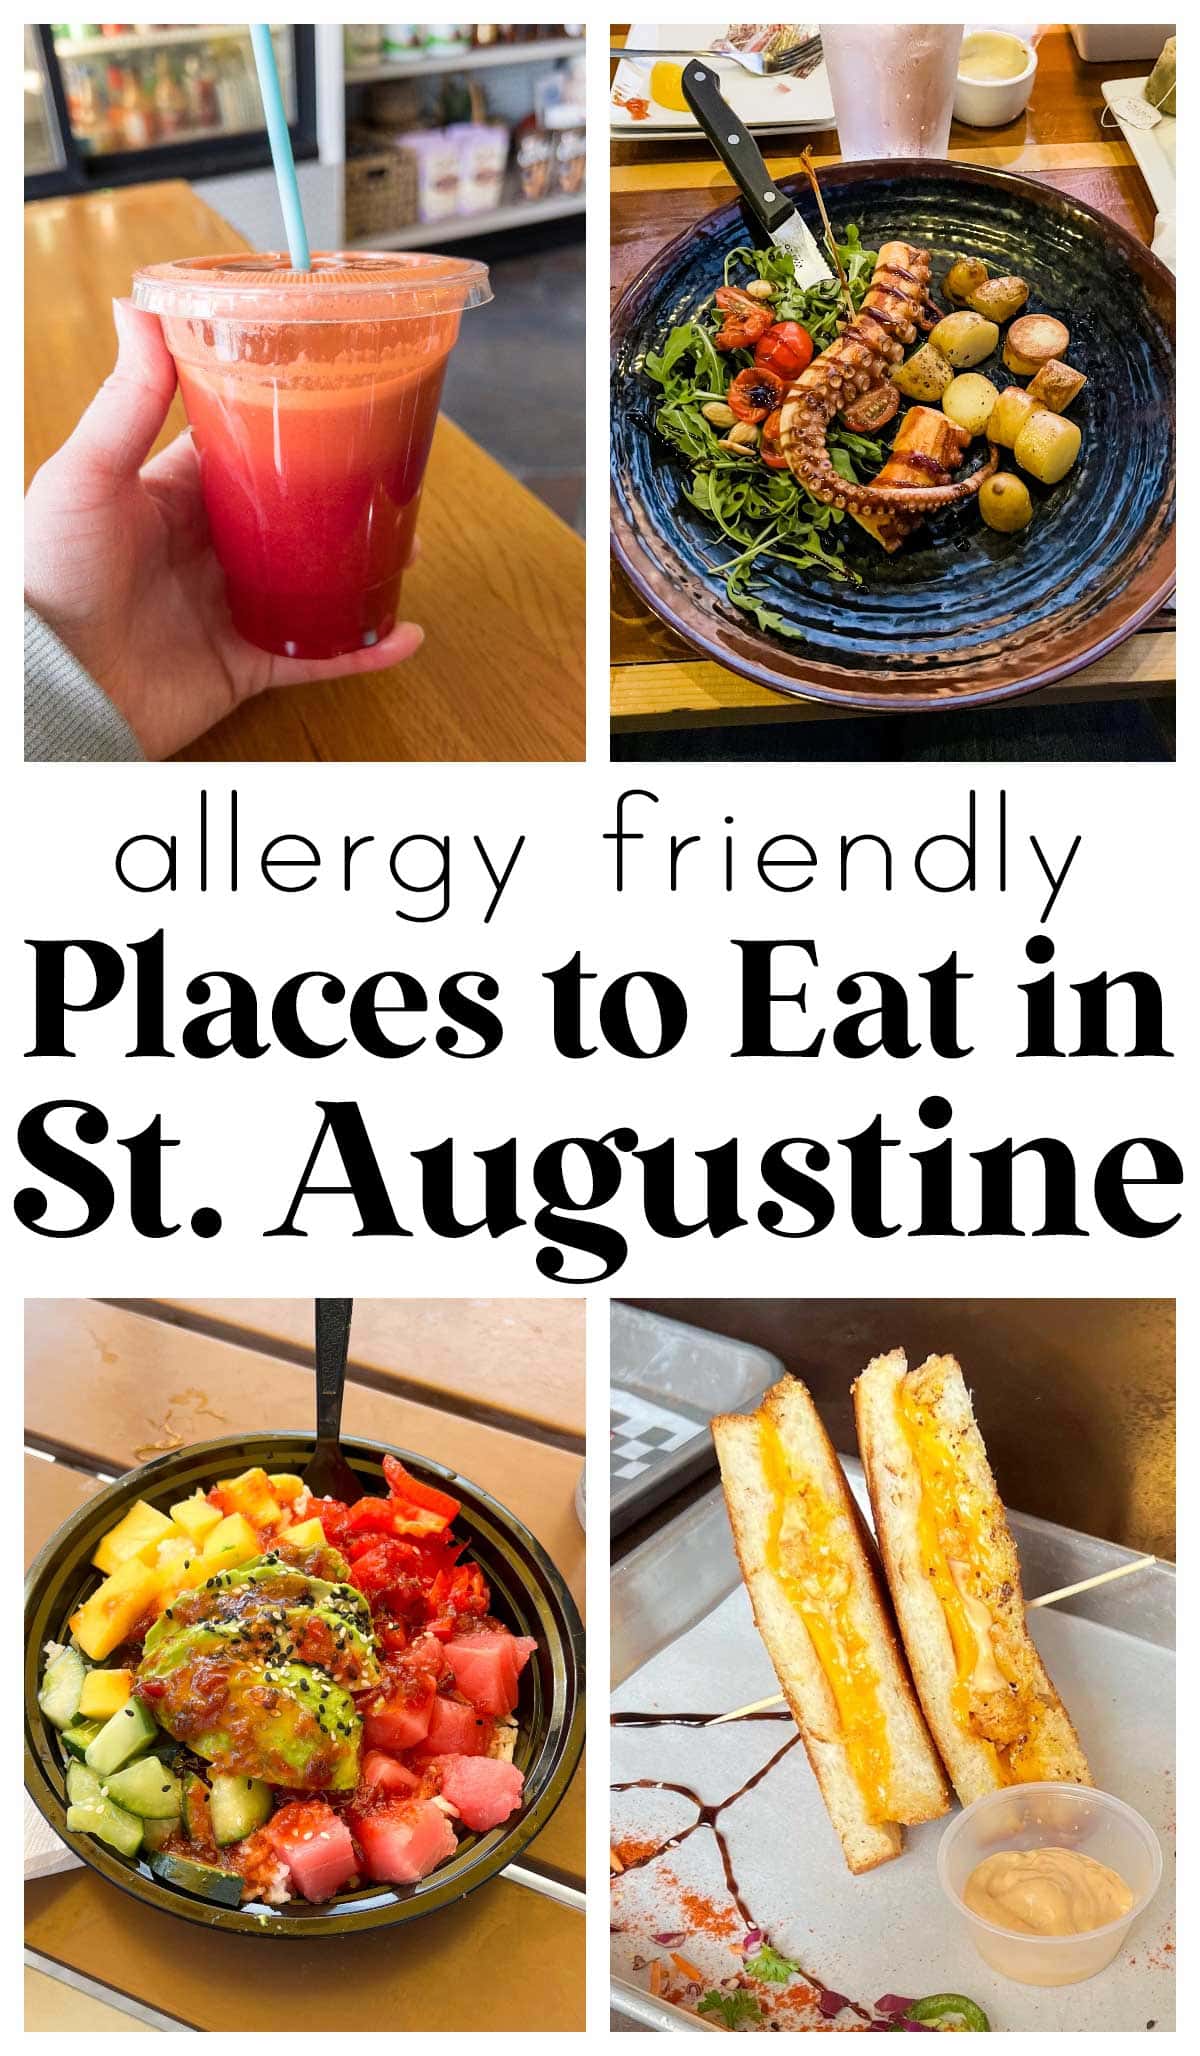 photo collage of various foods with text overlay that says "allergy friendly places to eat in St. Augustine".